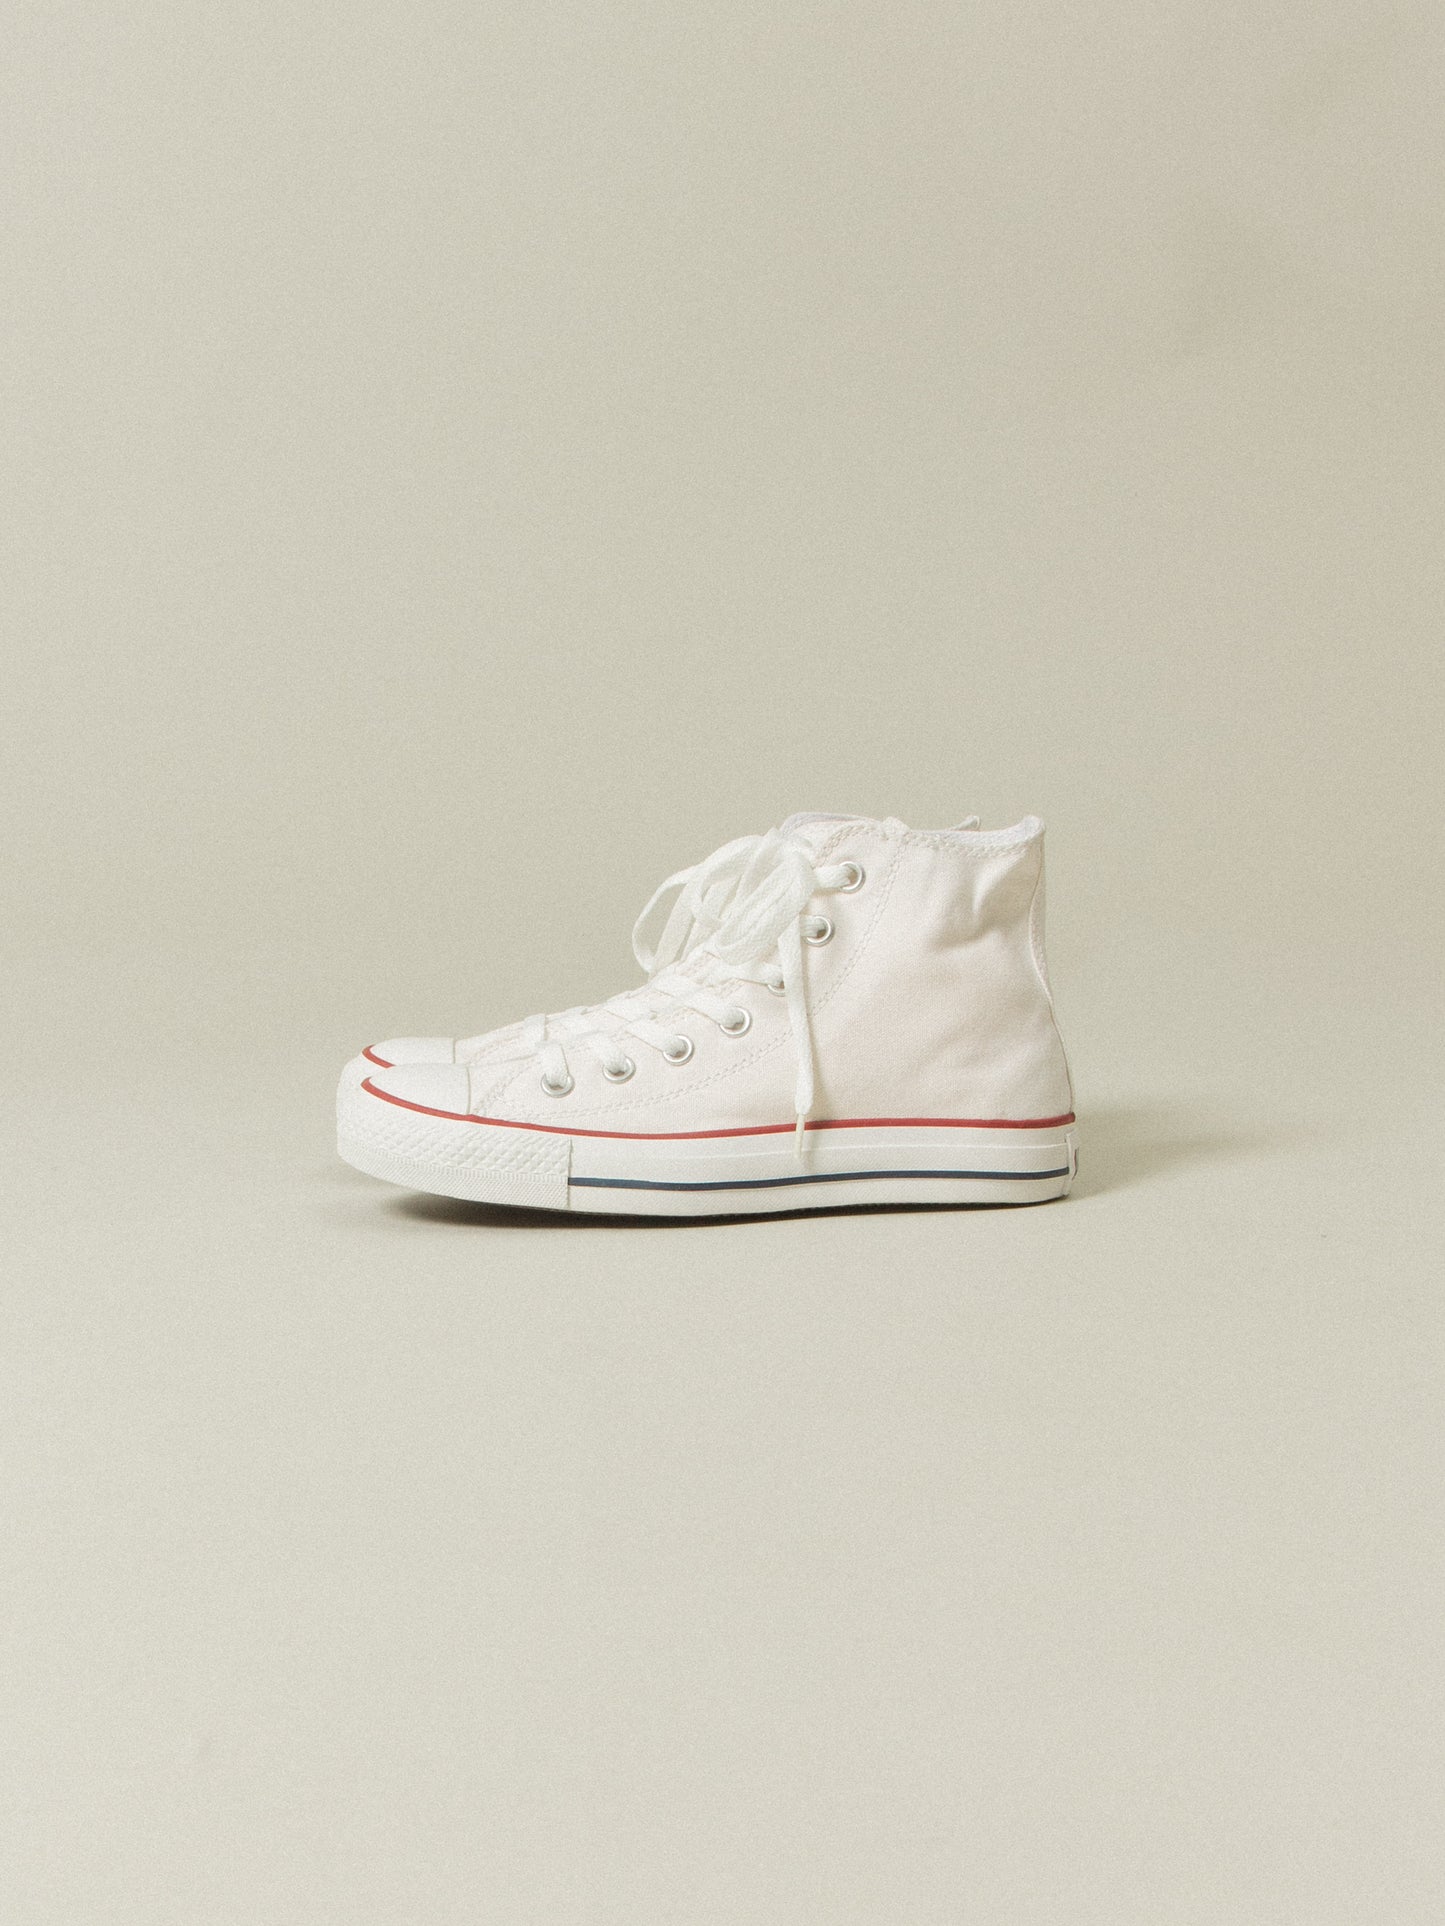 NOS Early 2000s Converse All Star - Optical White